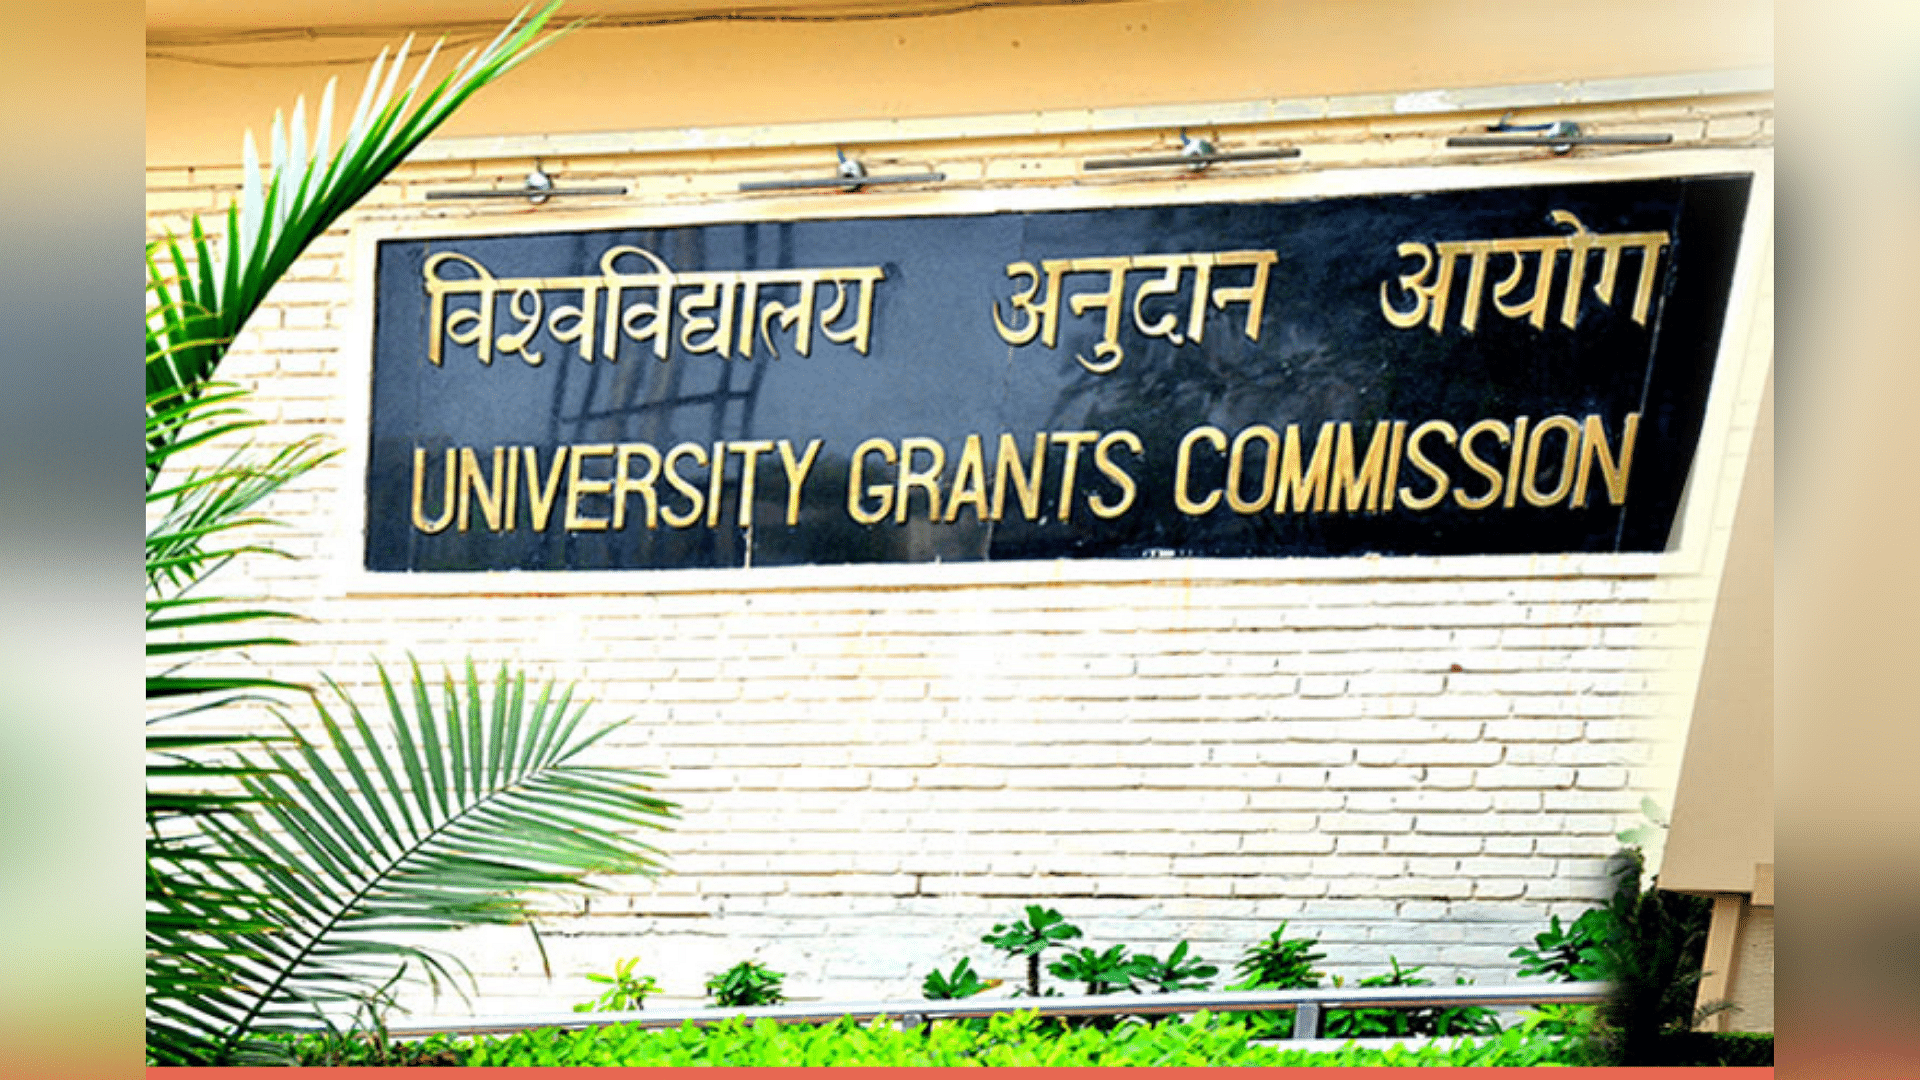 UGC released a list of 23 fake universities currently operating in India.